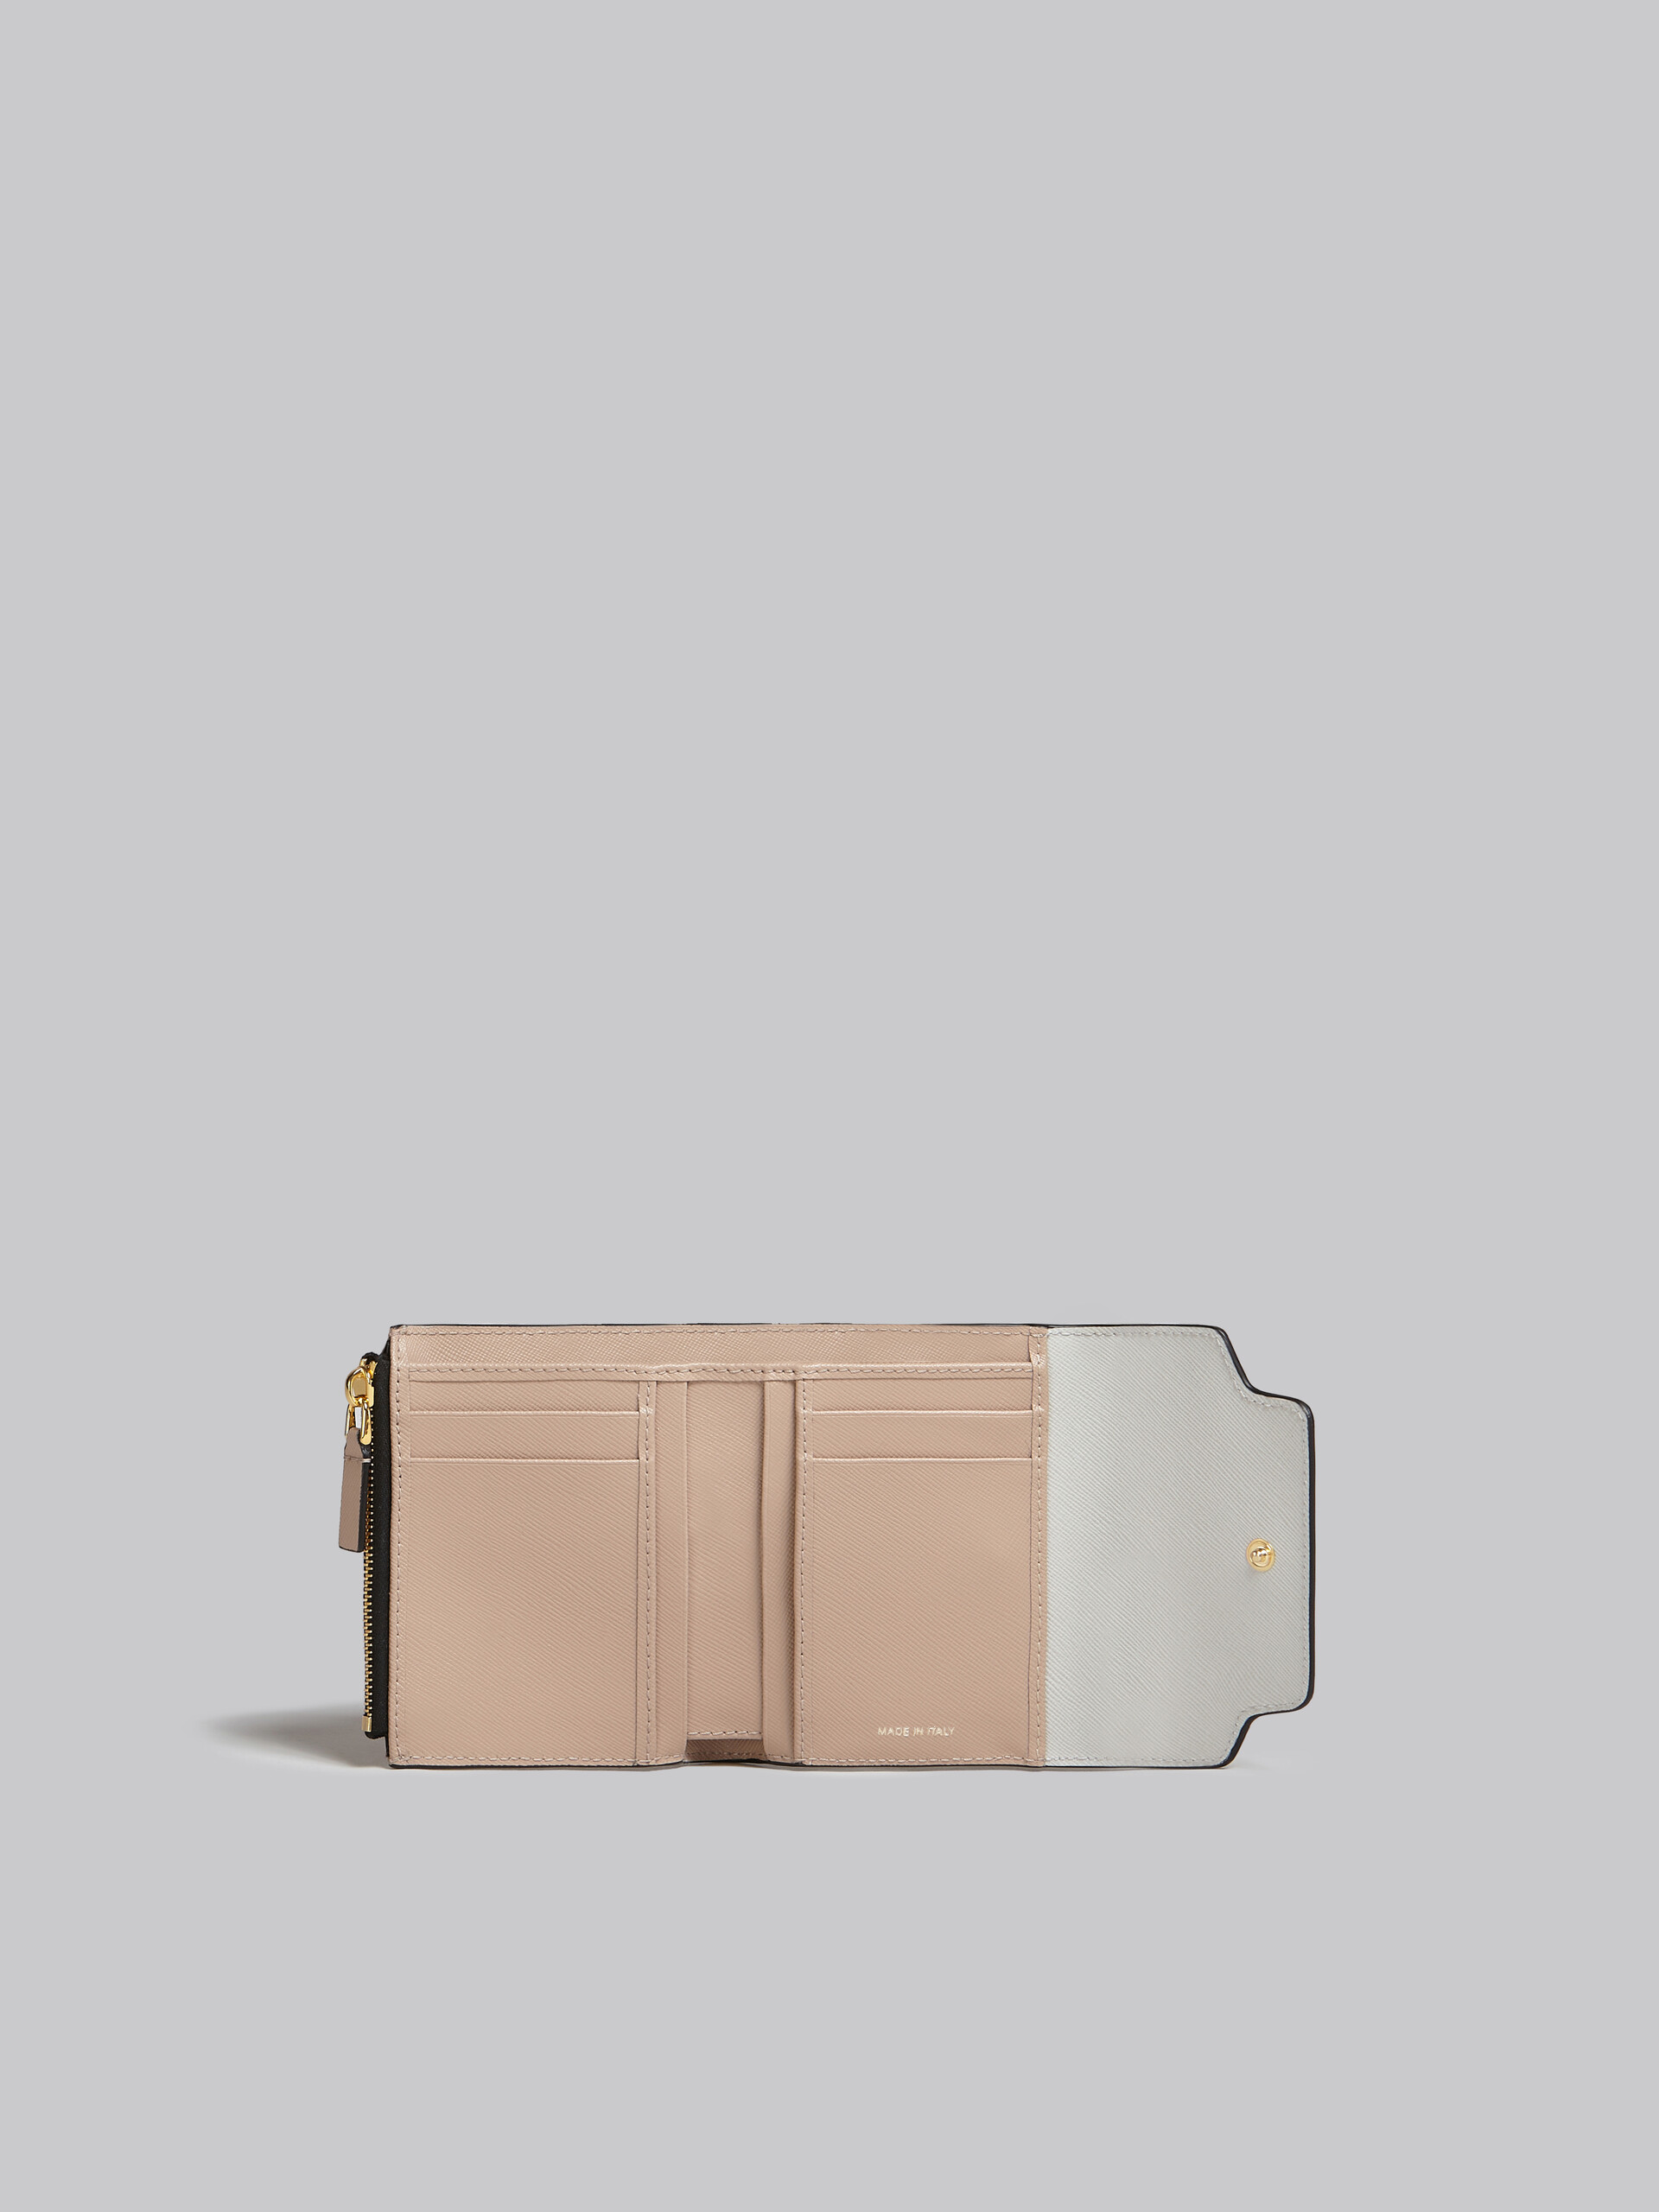 Orange white and beige saffiano leather wallet - Wallets - Image 2